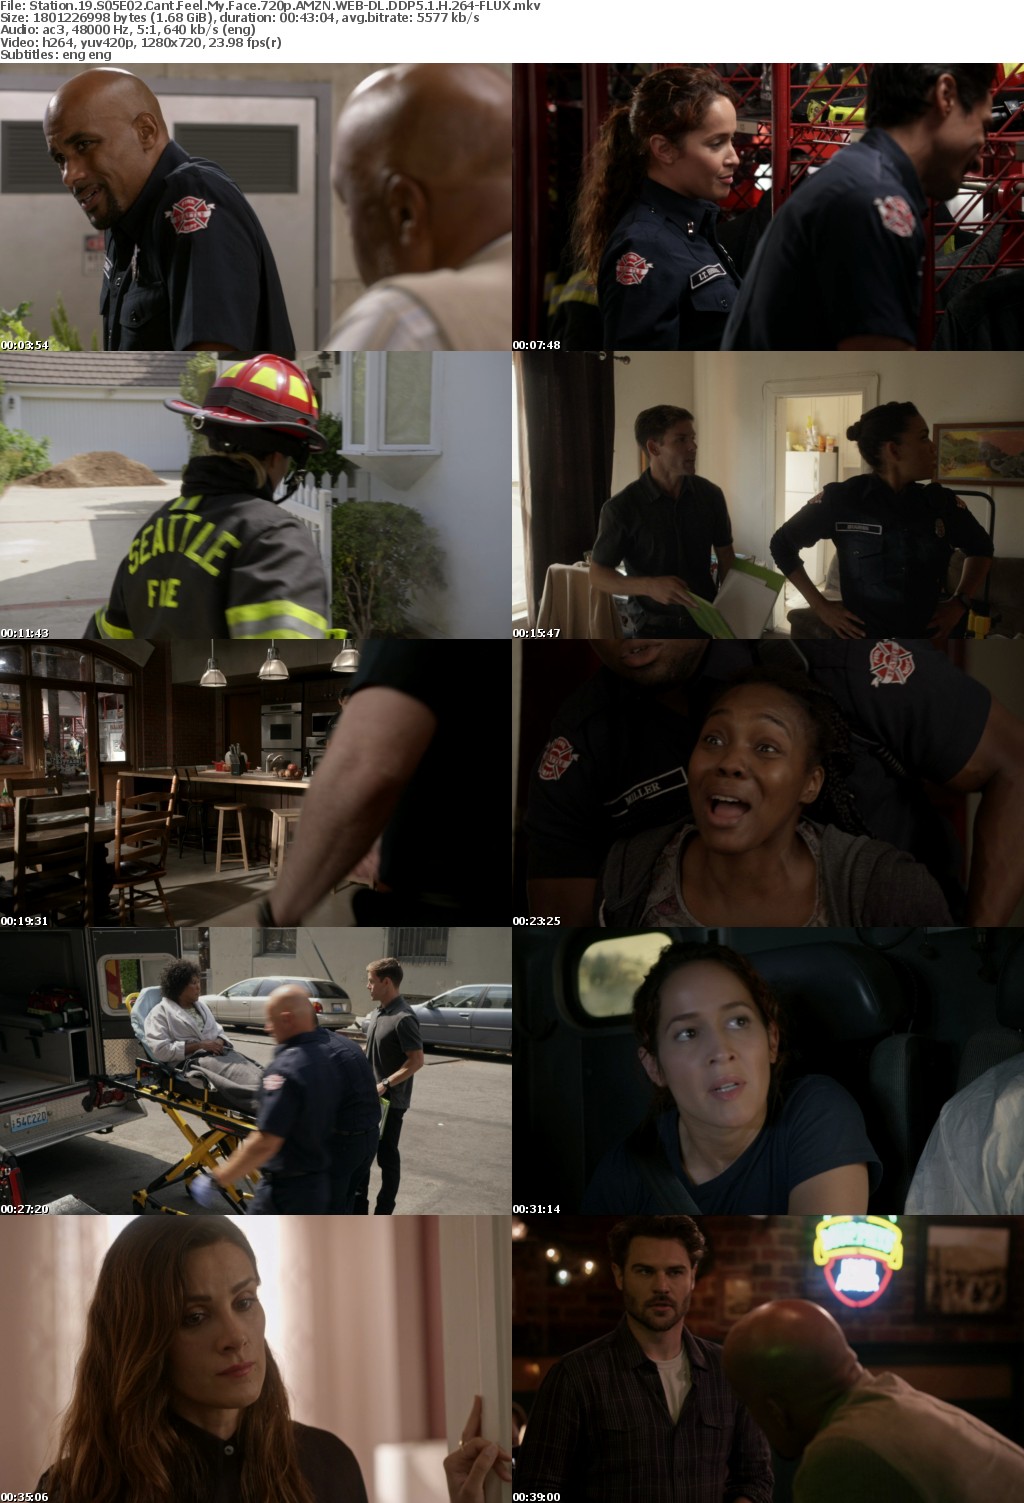 Station 19 S05E02 Cant Feel My Face 720p AMZN WEBRip DDP5 1 x264-FLUX